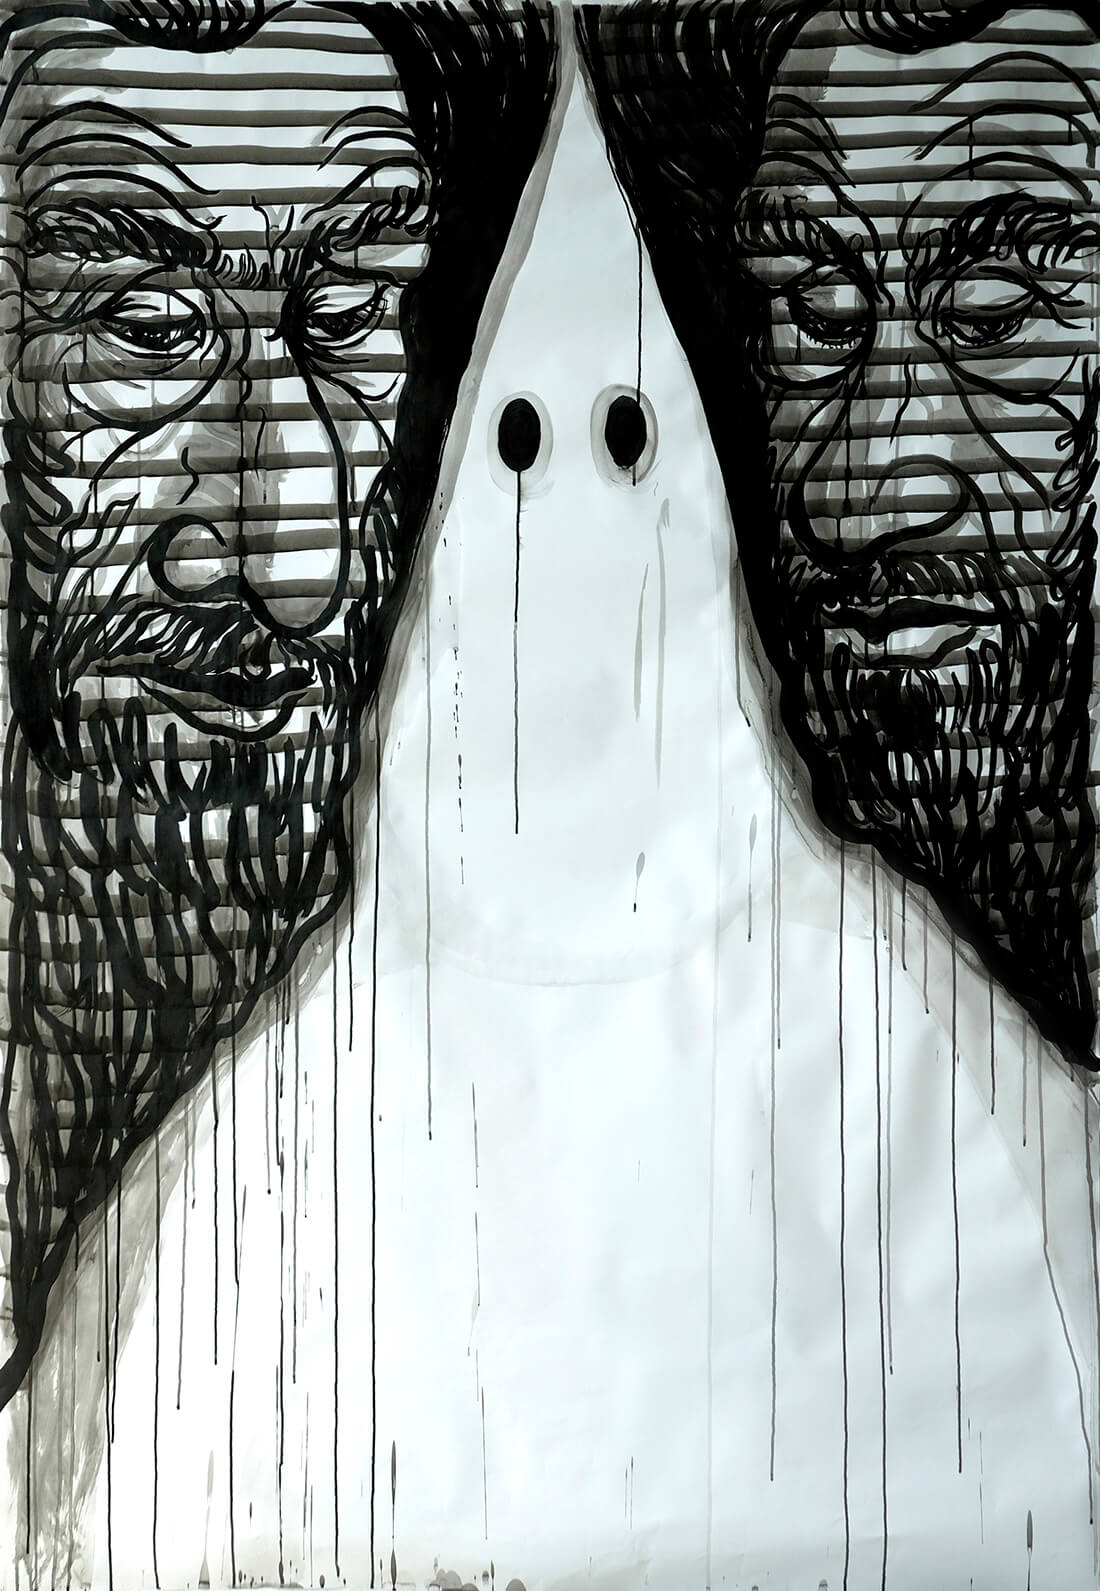 untitled (ayatollahs, point hat), 210 x 130 cm, ink on paper, 2007